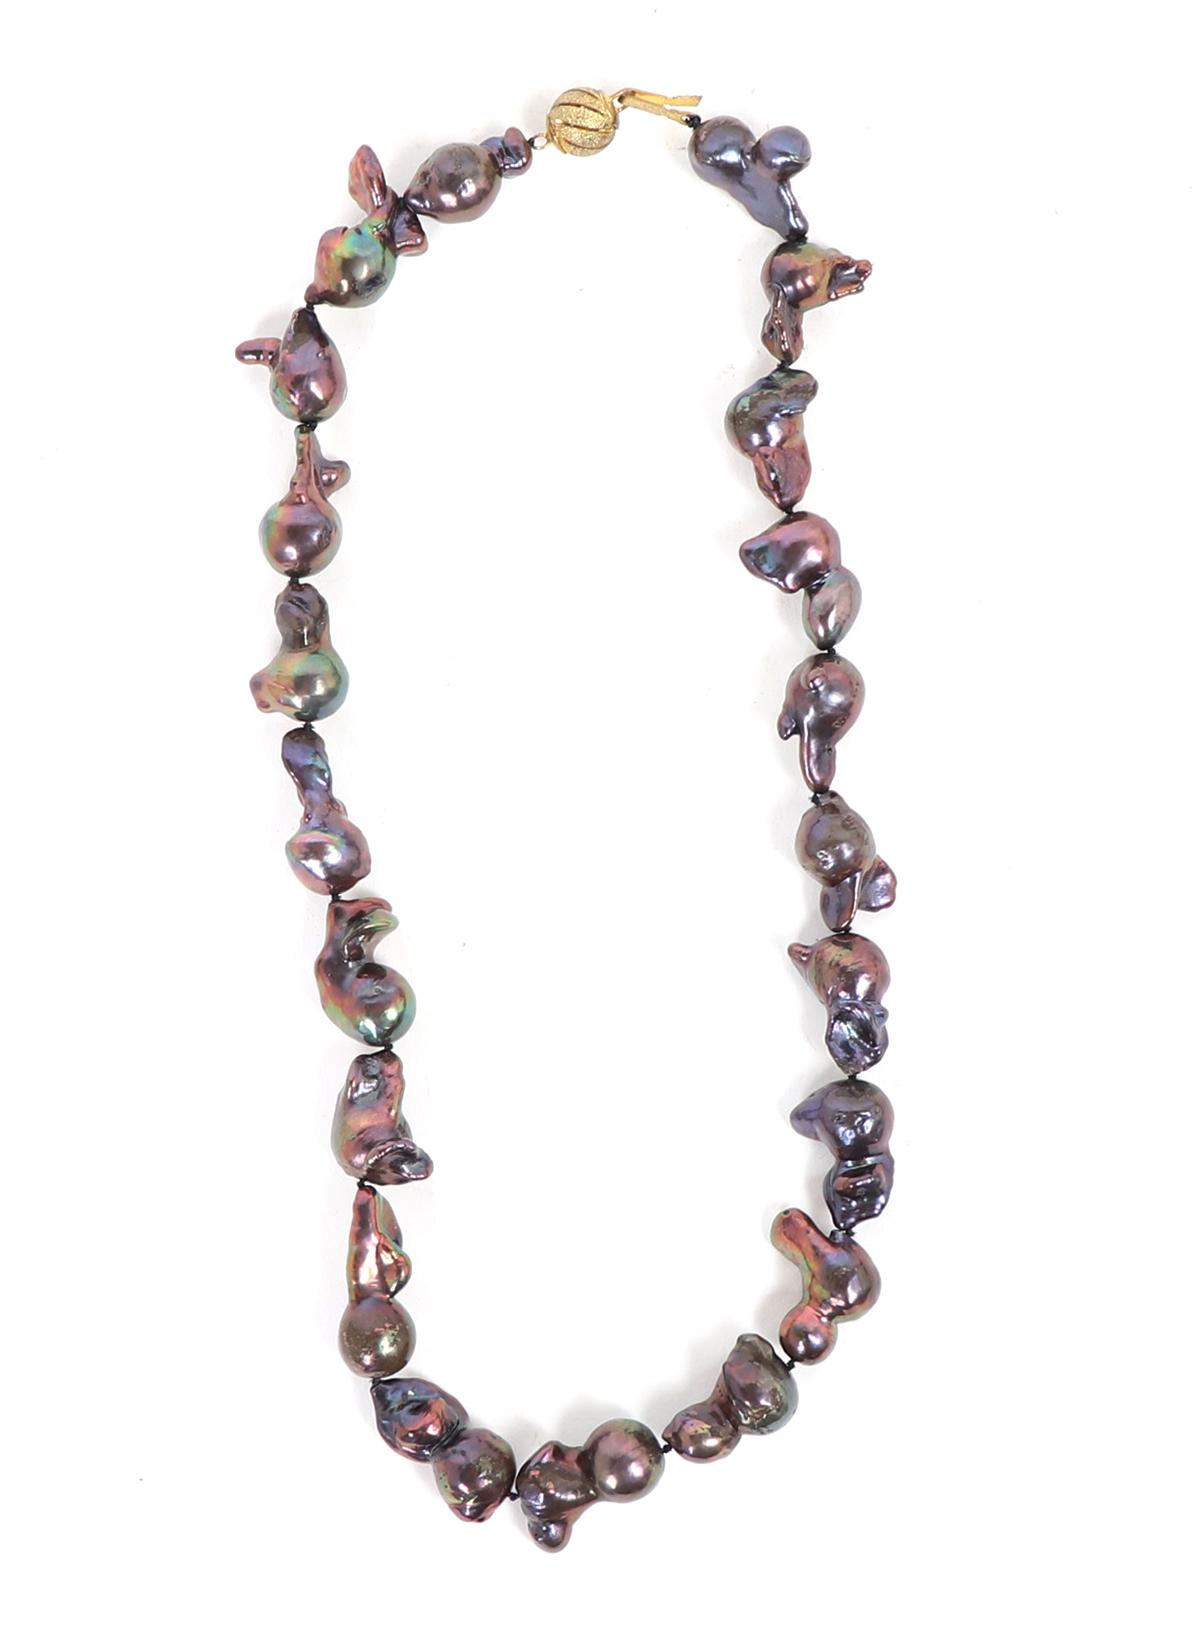 Lovely Fresh Water Pearl Necklace